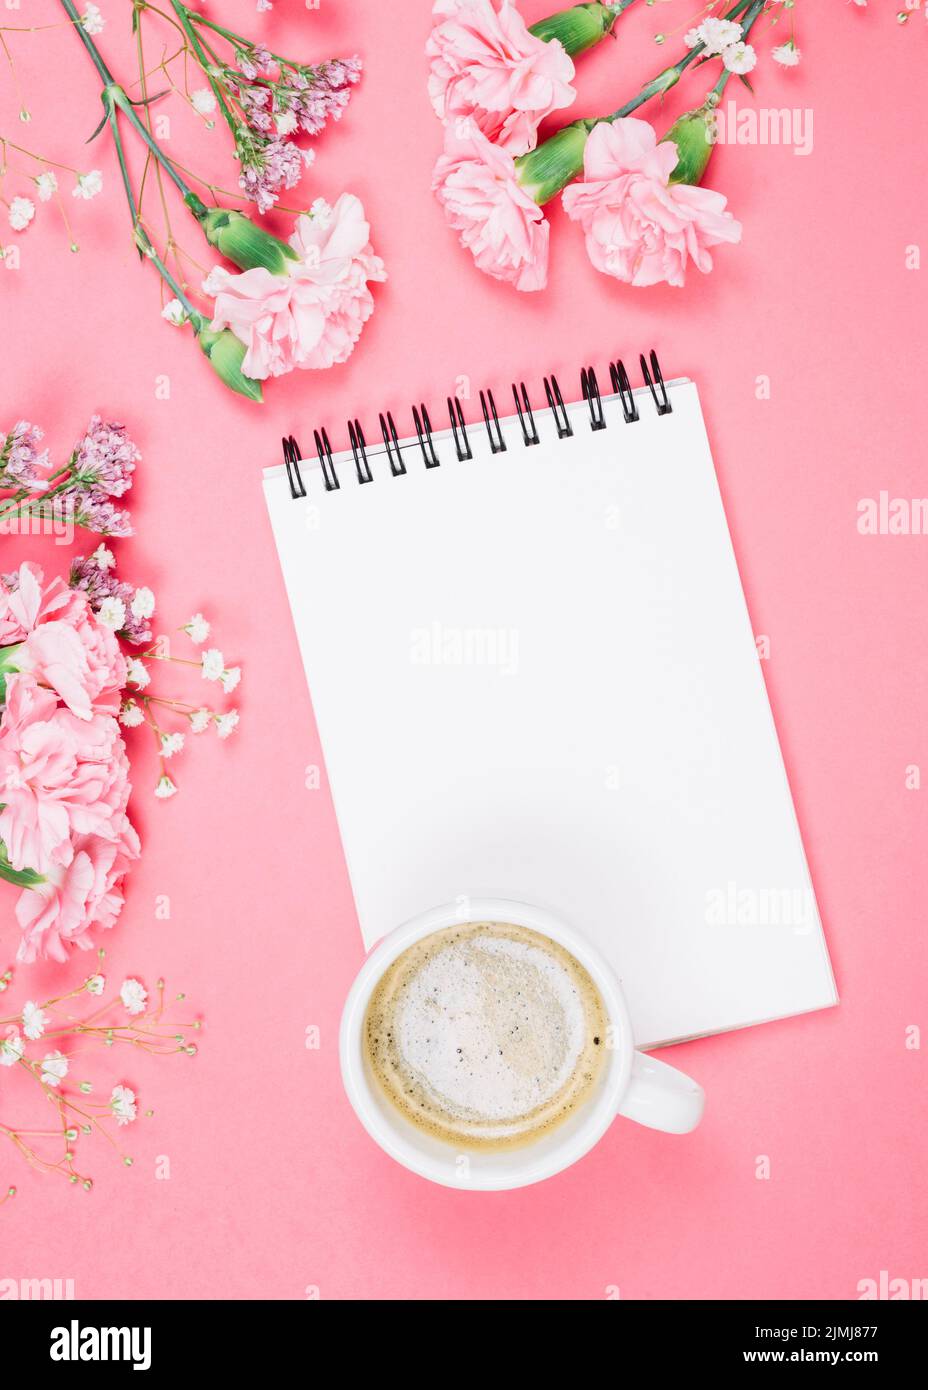 Overhead view coffee cup blank notepad with carnations gypsophila limonium flowers pink background Stock Photo